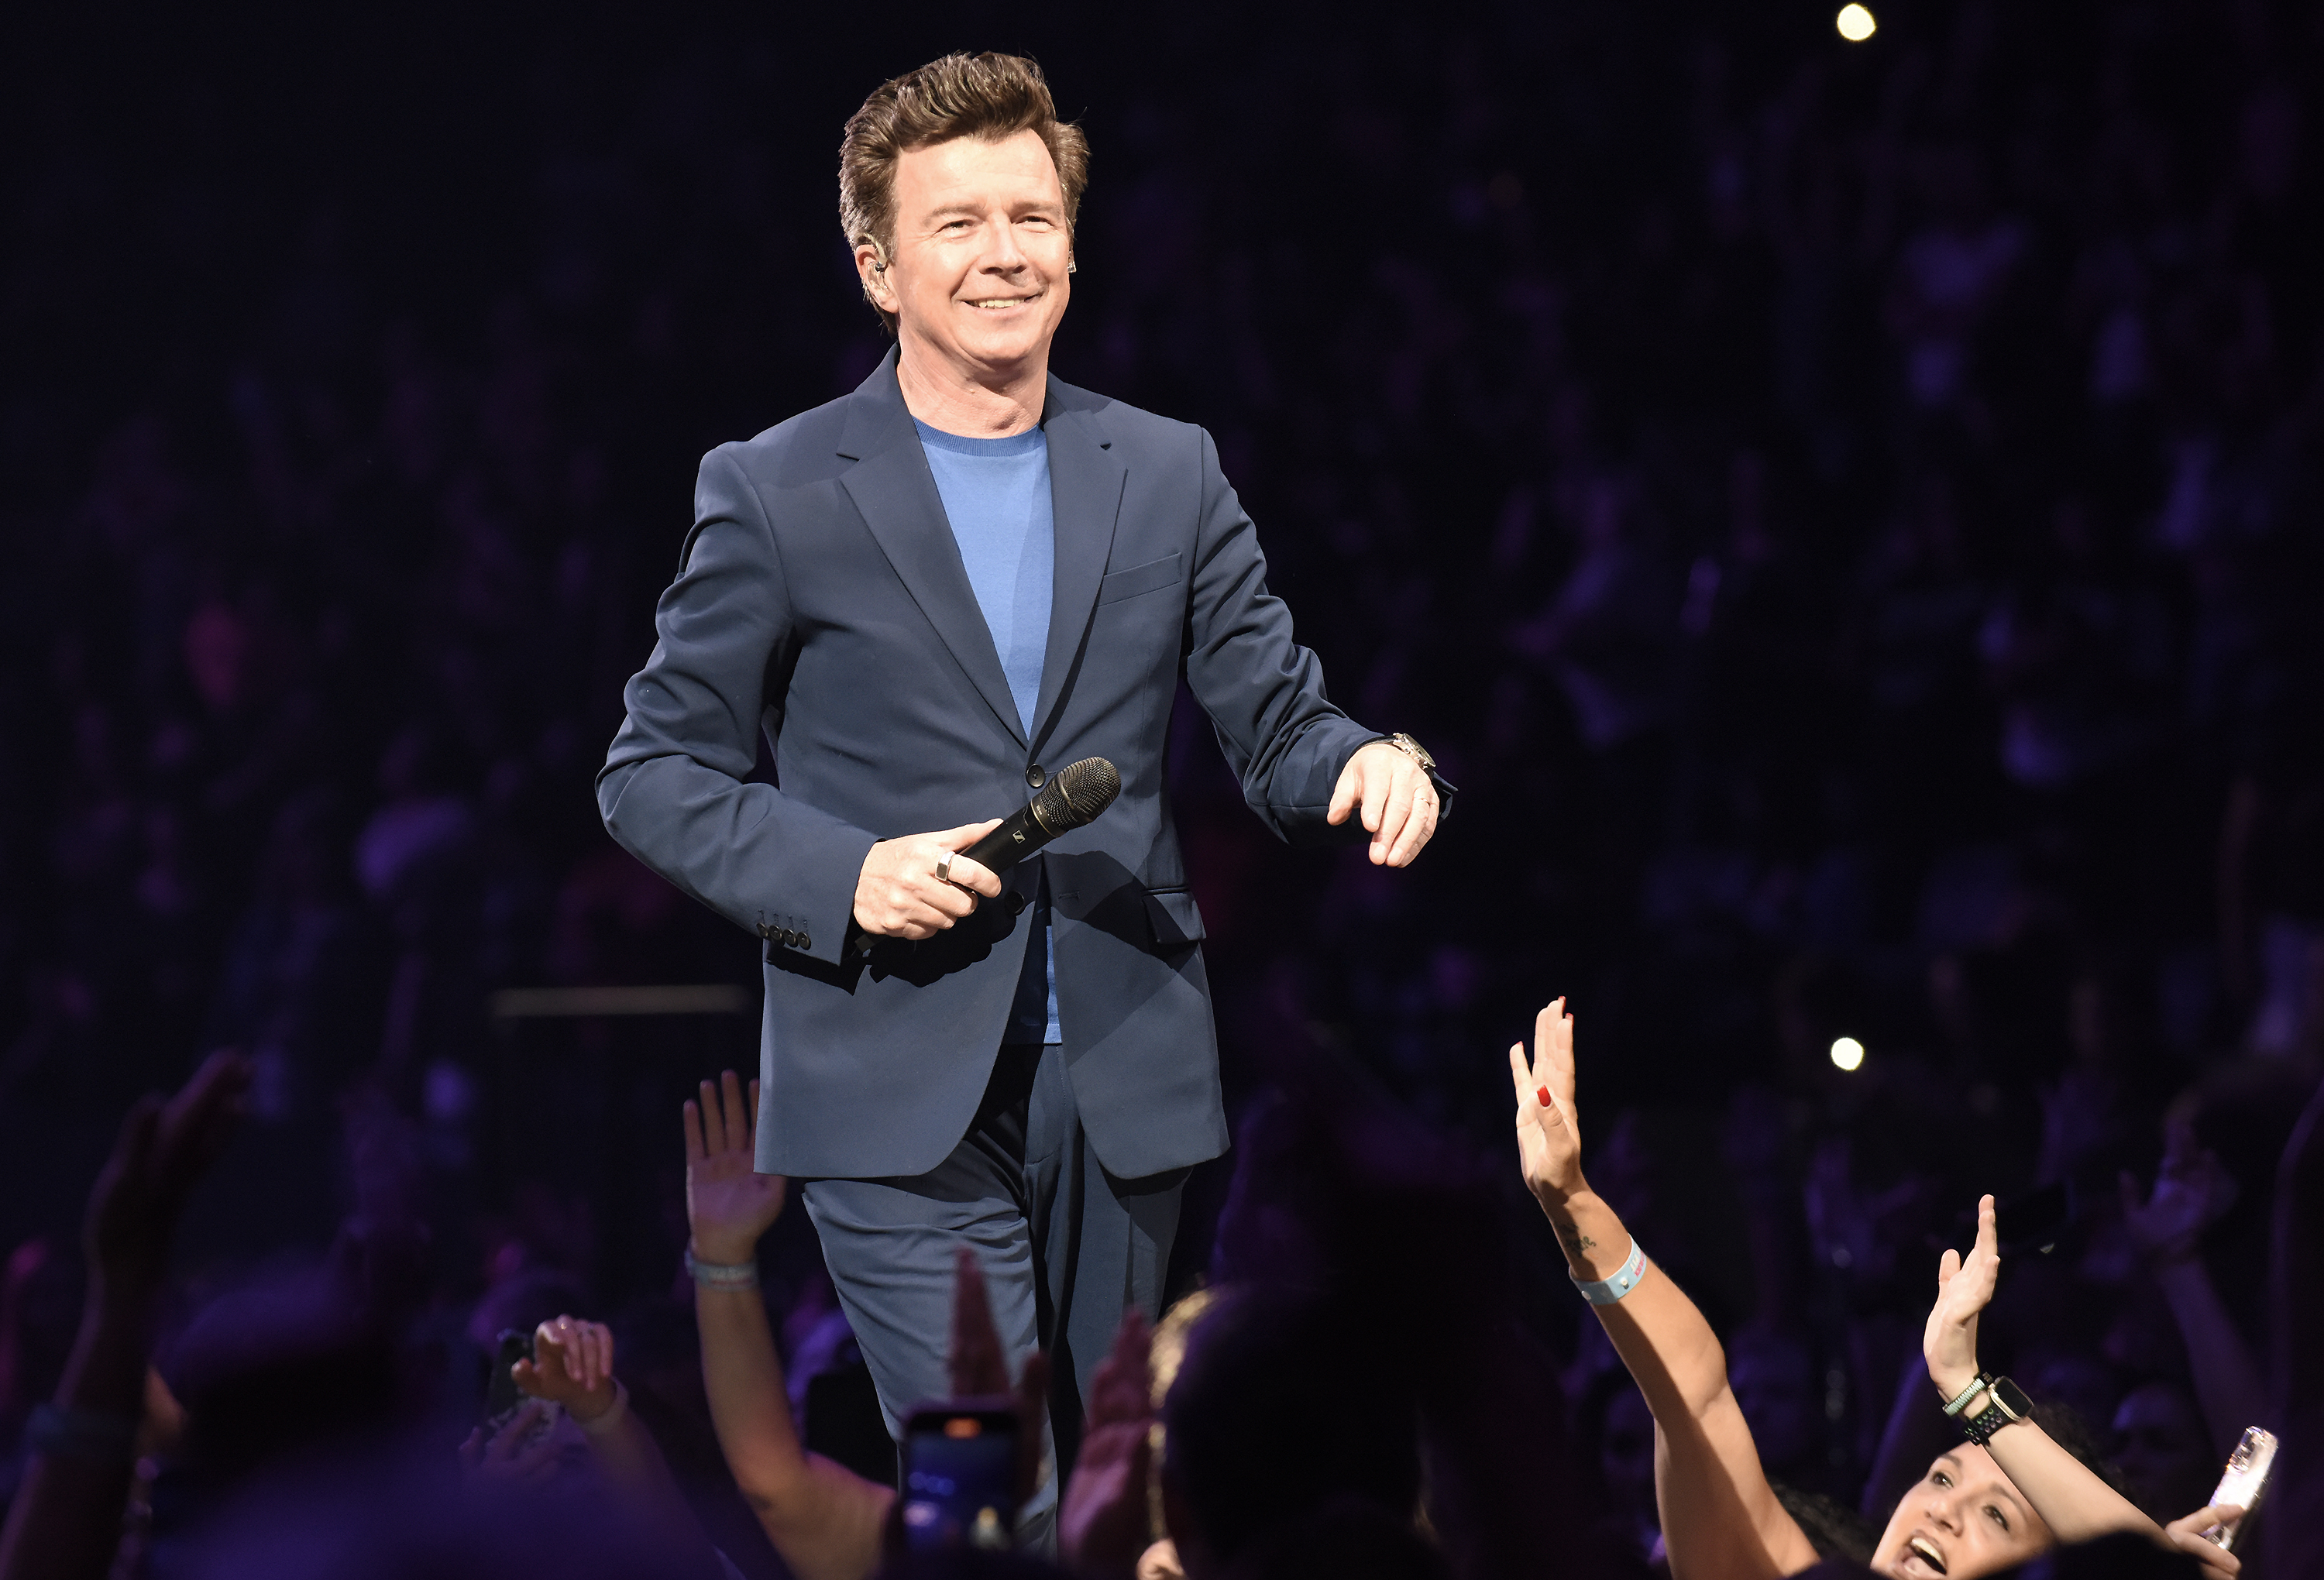 You're not being rickrolled: Rick Astley just hit number one in